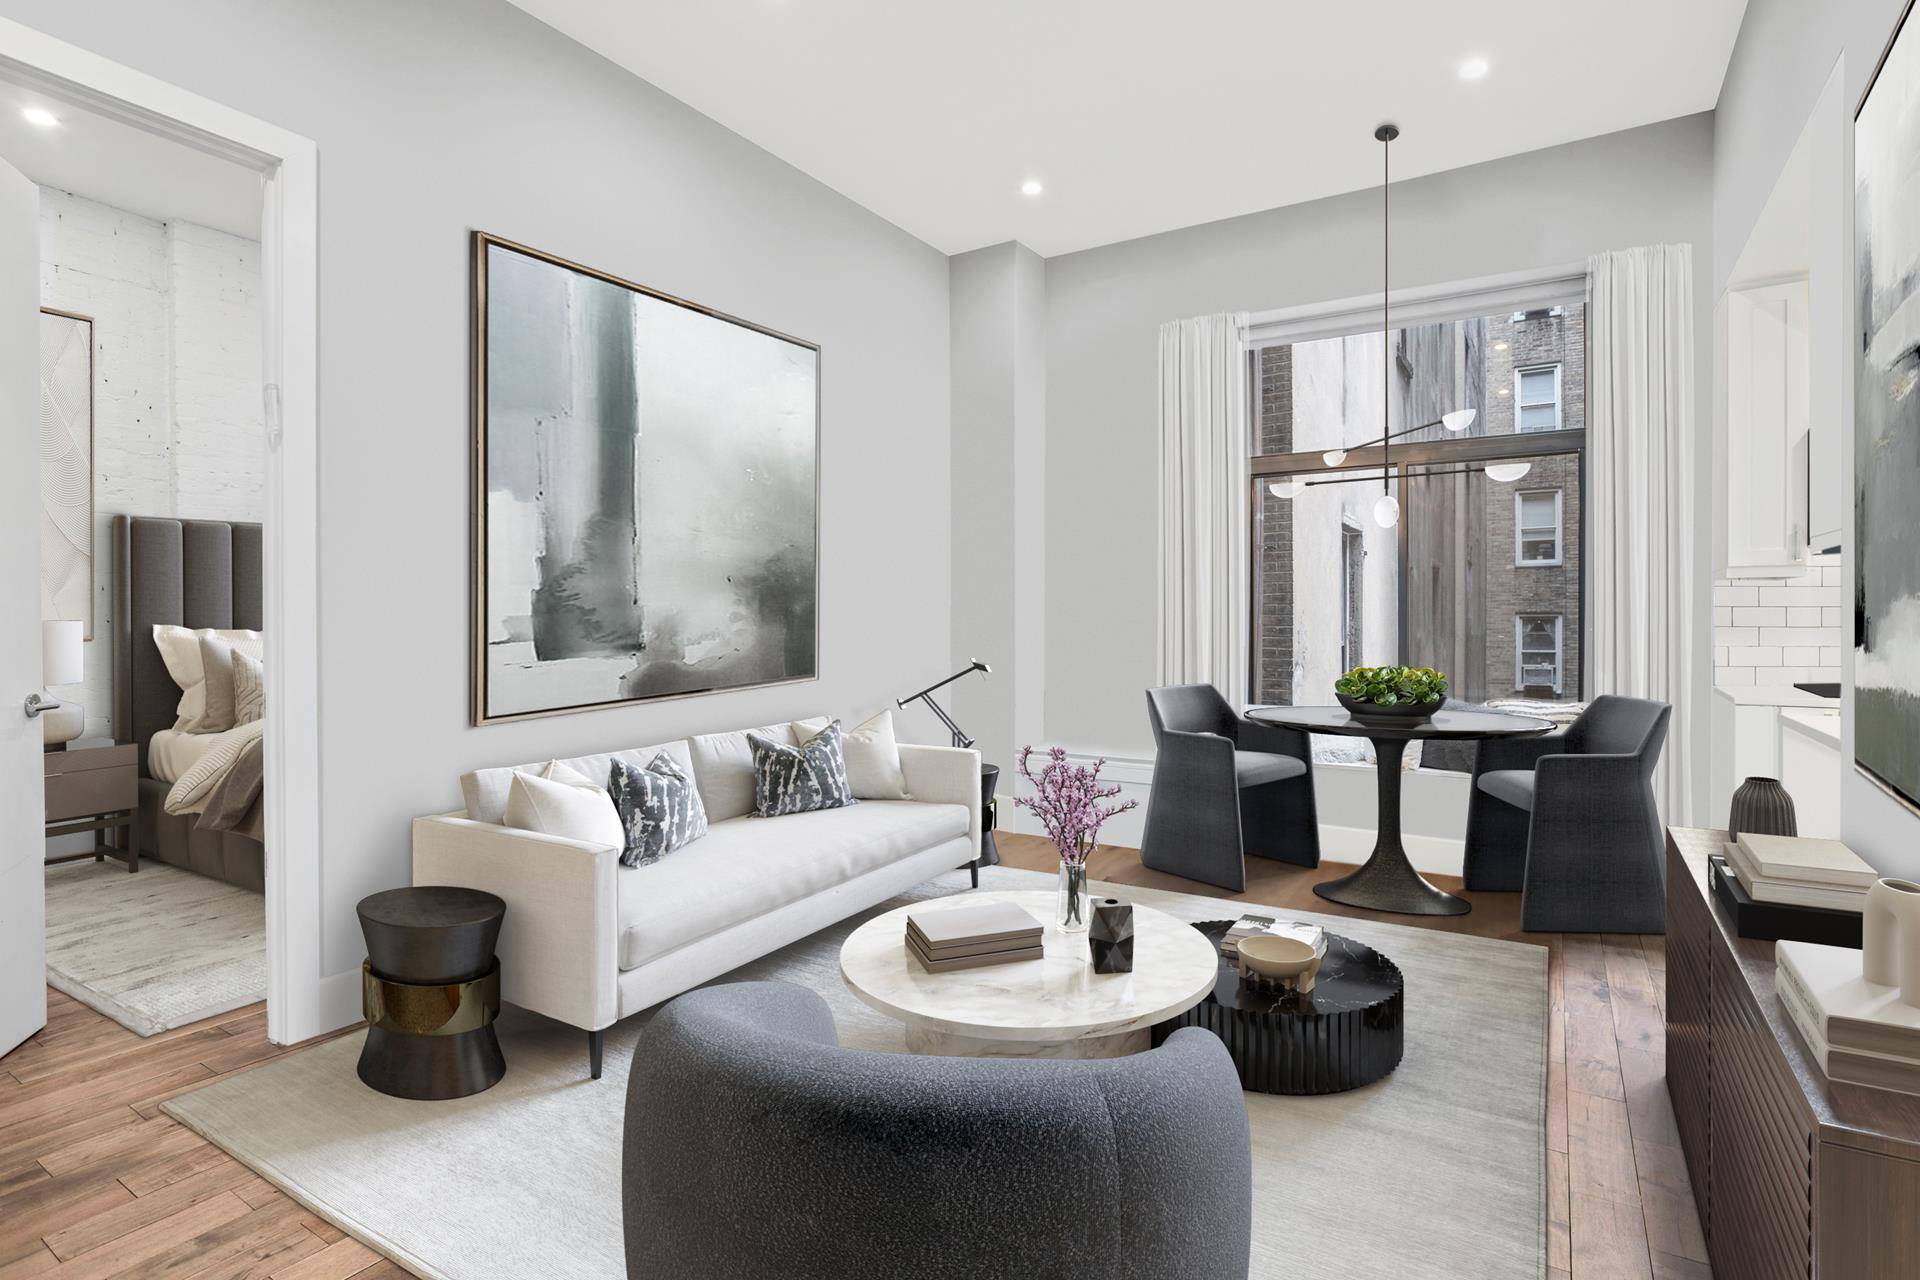 Welcome home to this completely renovated dramatic one bedroom one bathroom apartment with 11 Foot ceilings, exposed brick walls, and over sized windows at the highly sought after Greenwich Village ...